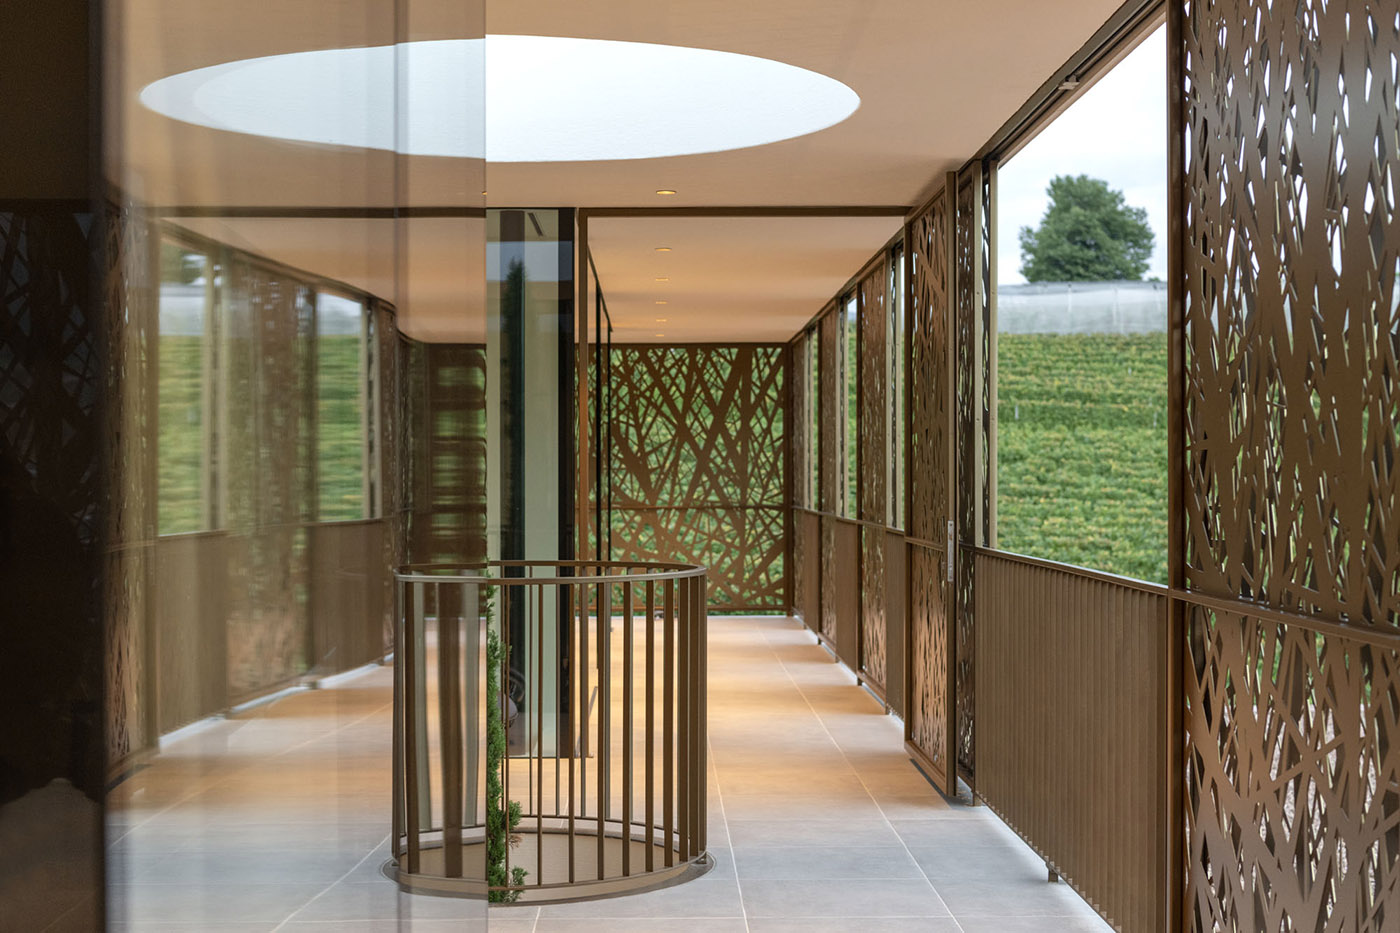 Casa P2, the architecture narrates the porphyry of Monticolo and the Mendola vineyards